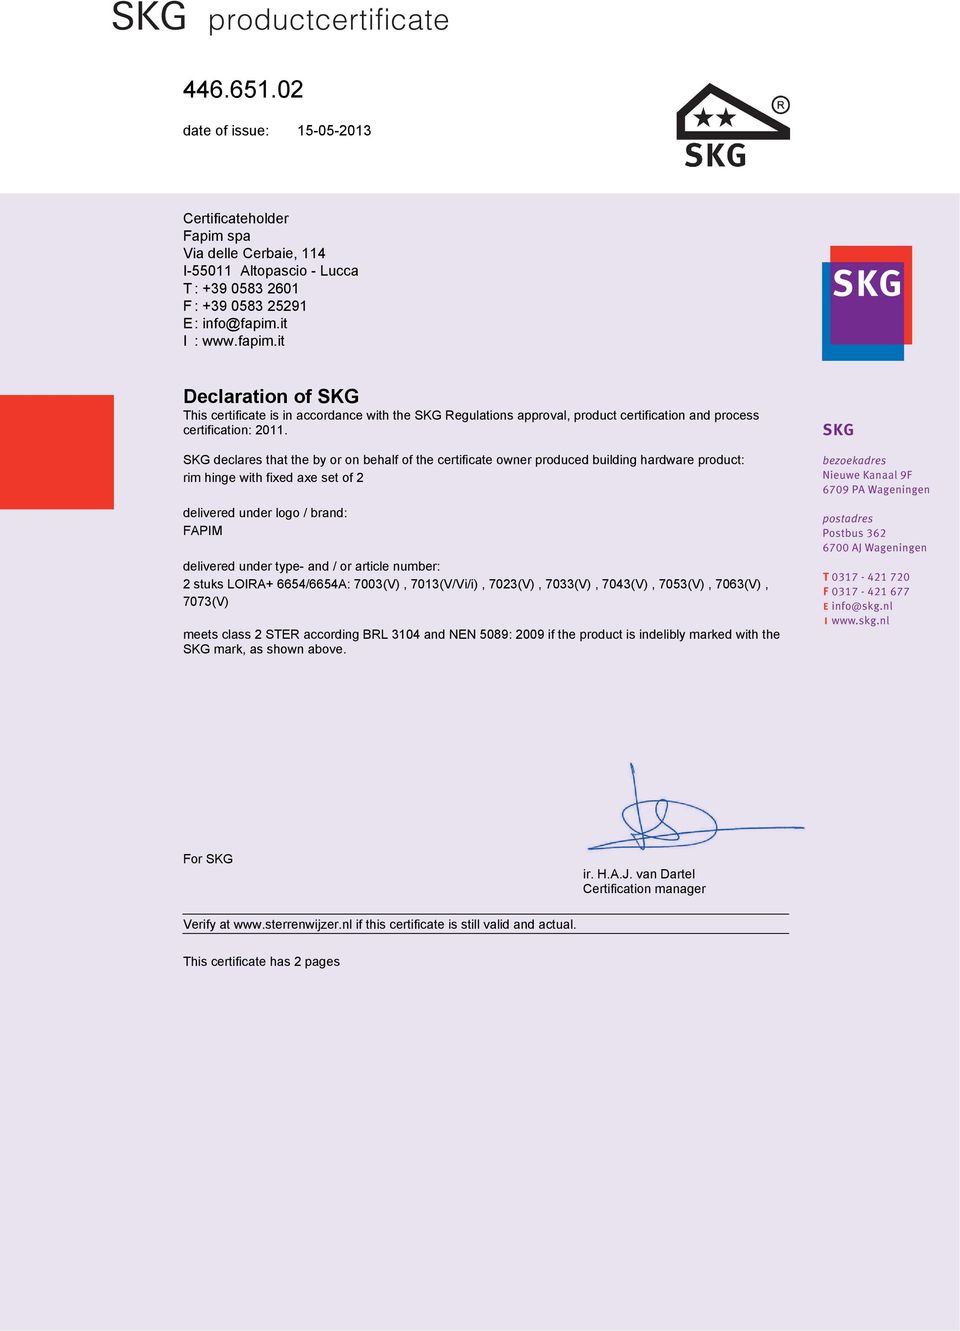 SKG declares that the by or on behalf of the certificate owner produced building hardware product: rim hinge with fixed axe set of 2 delivered under logo / brand: FAPIM delivered under type- and / or